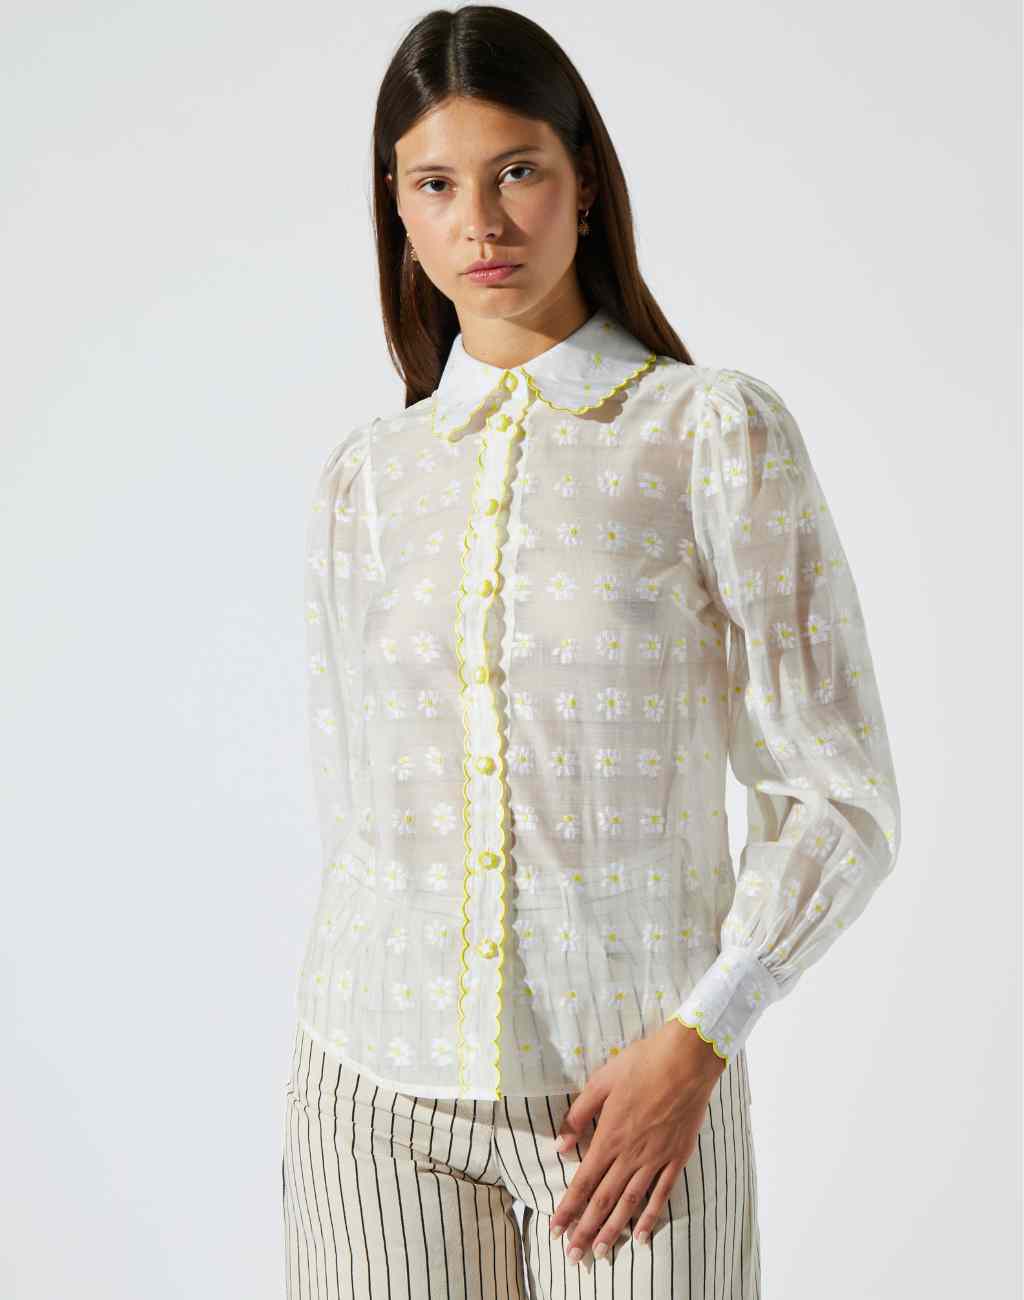 White Blouse with Whimsical Daisy Embroidery and Daisy Buttons - Visit Nifty Manoush 